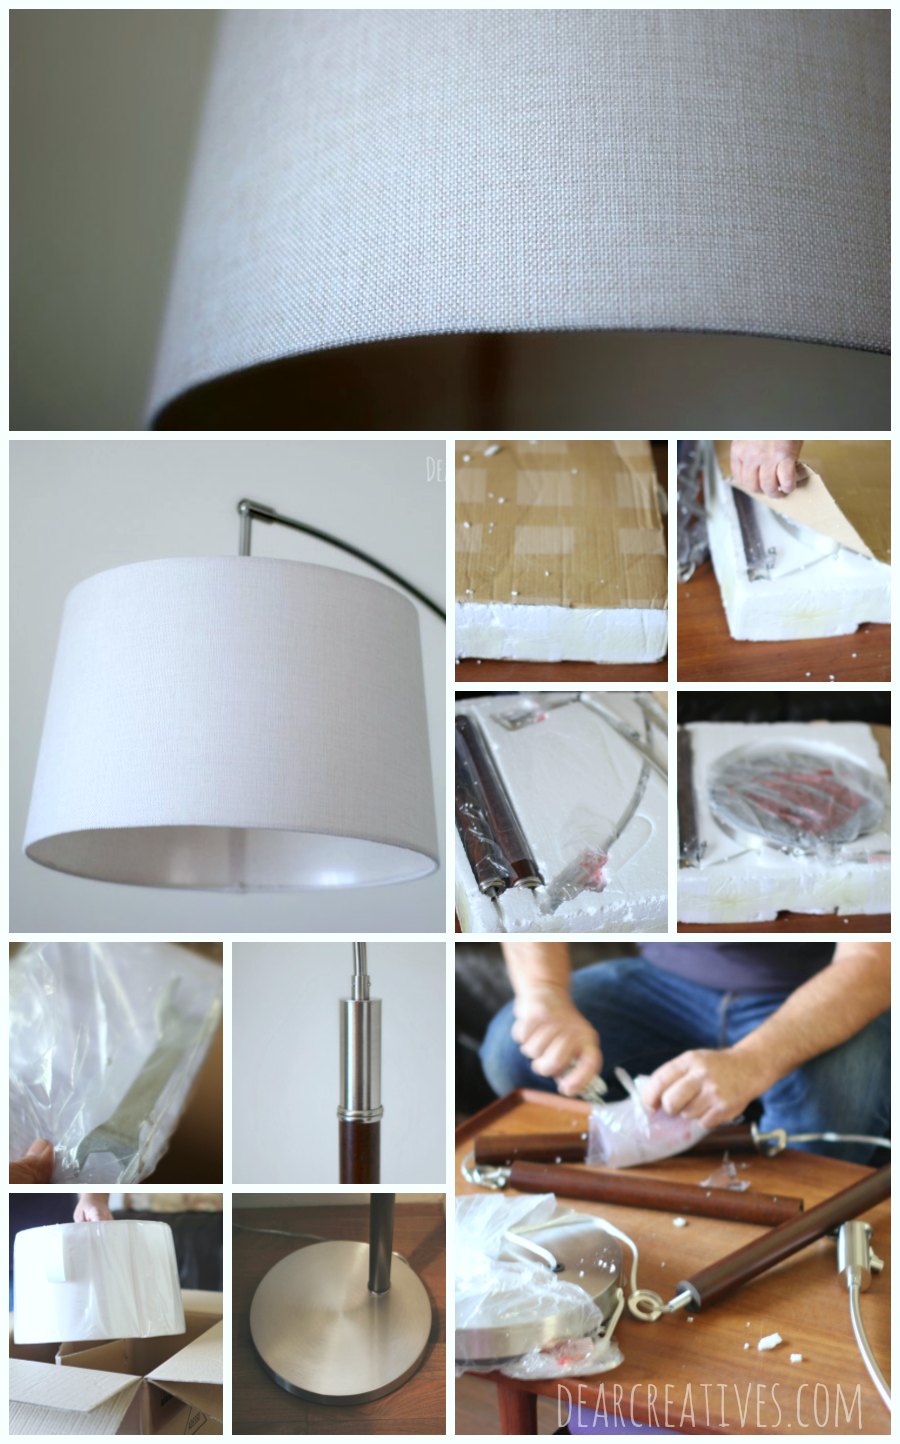 Home Decor Home Decor Accent Putting together a home decor accent piece lamp-reading lamp